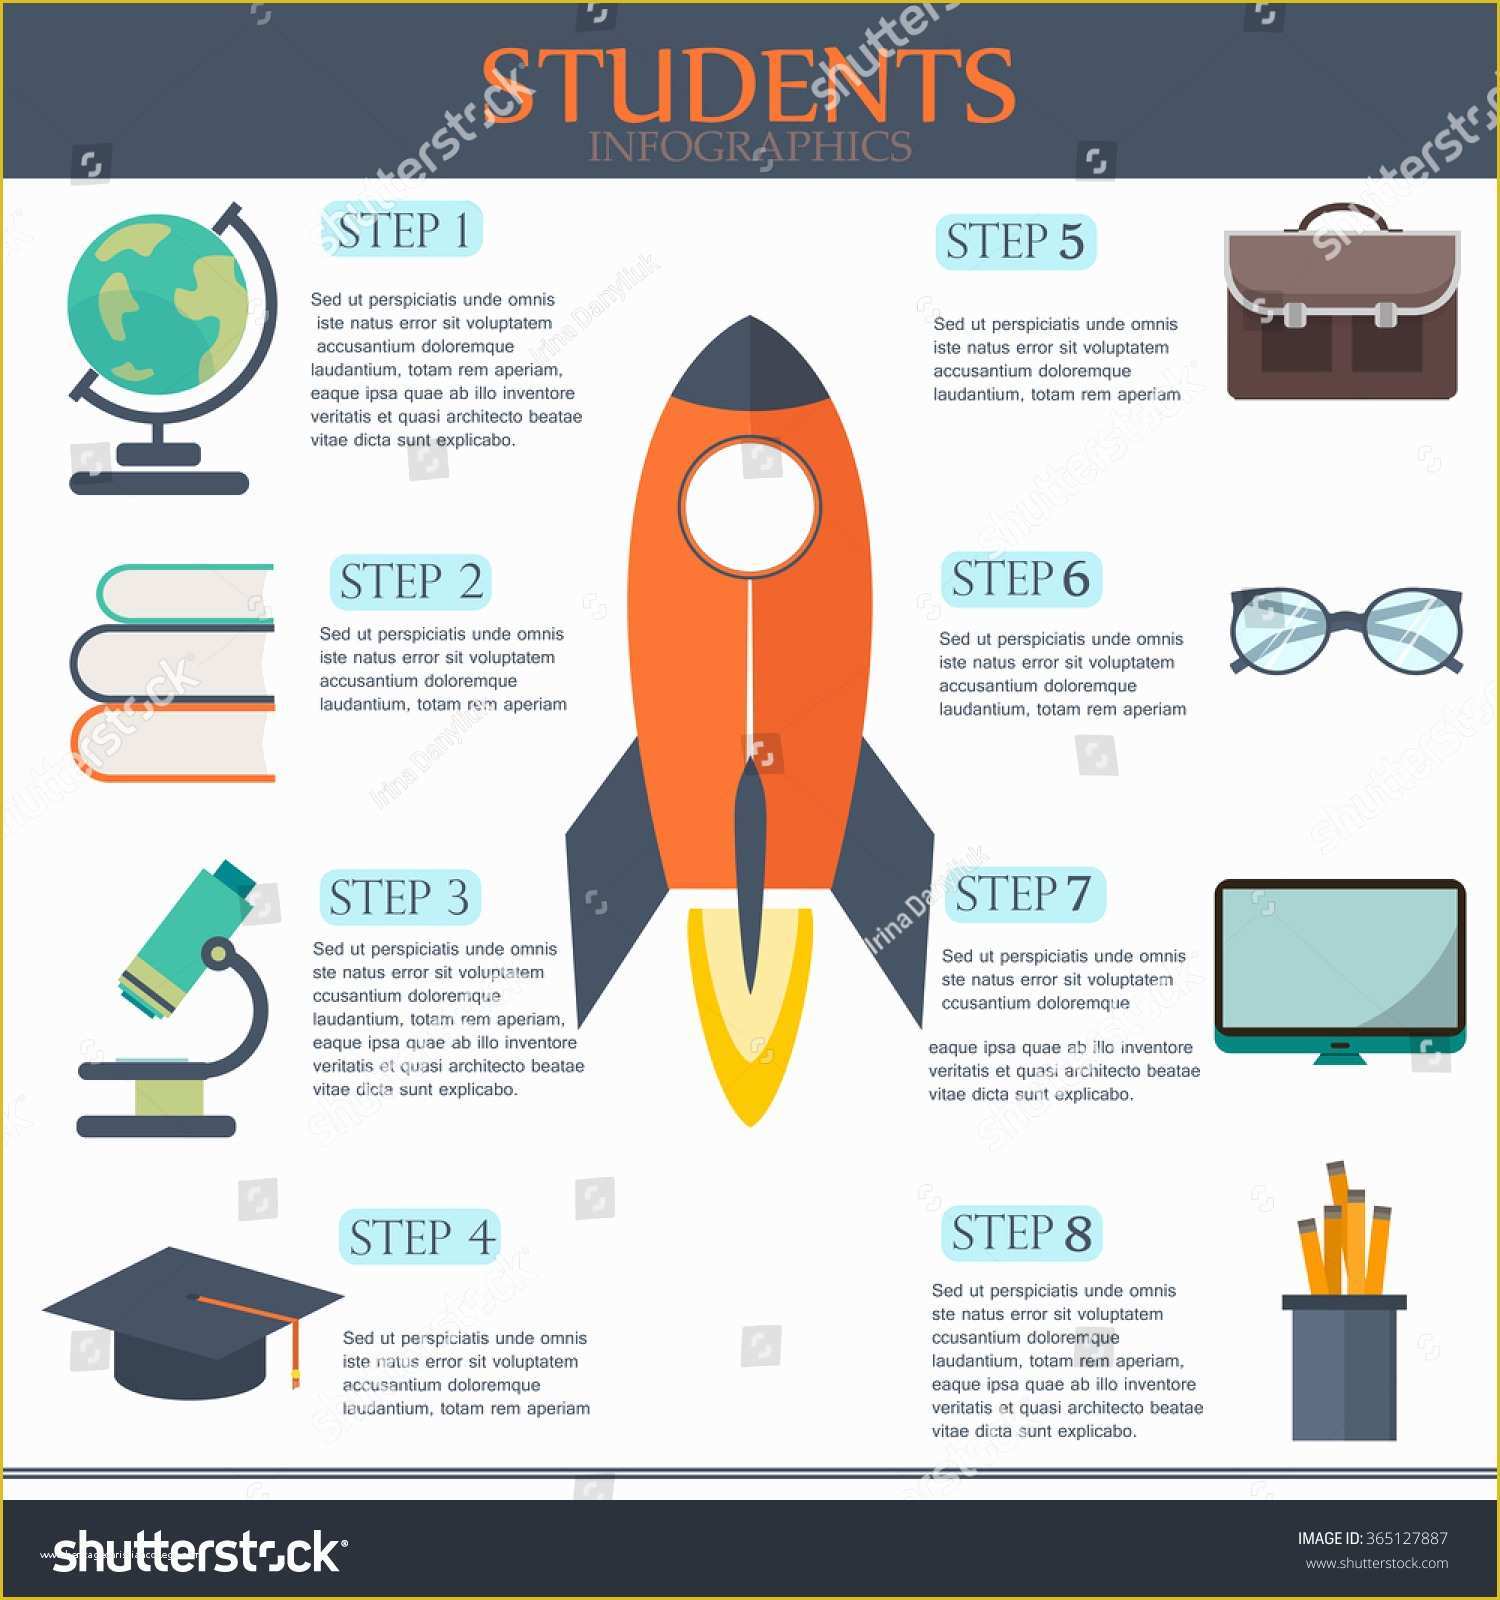 Free Infographic Templates for Students Of Infographic Education Template Designstudent Infographic